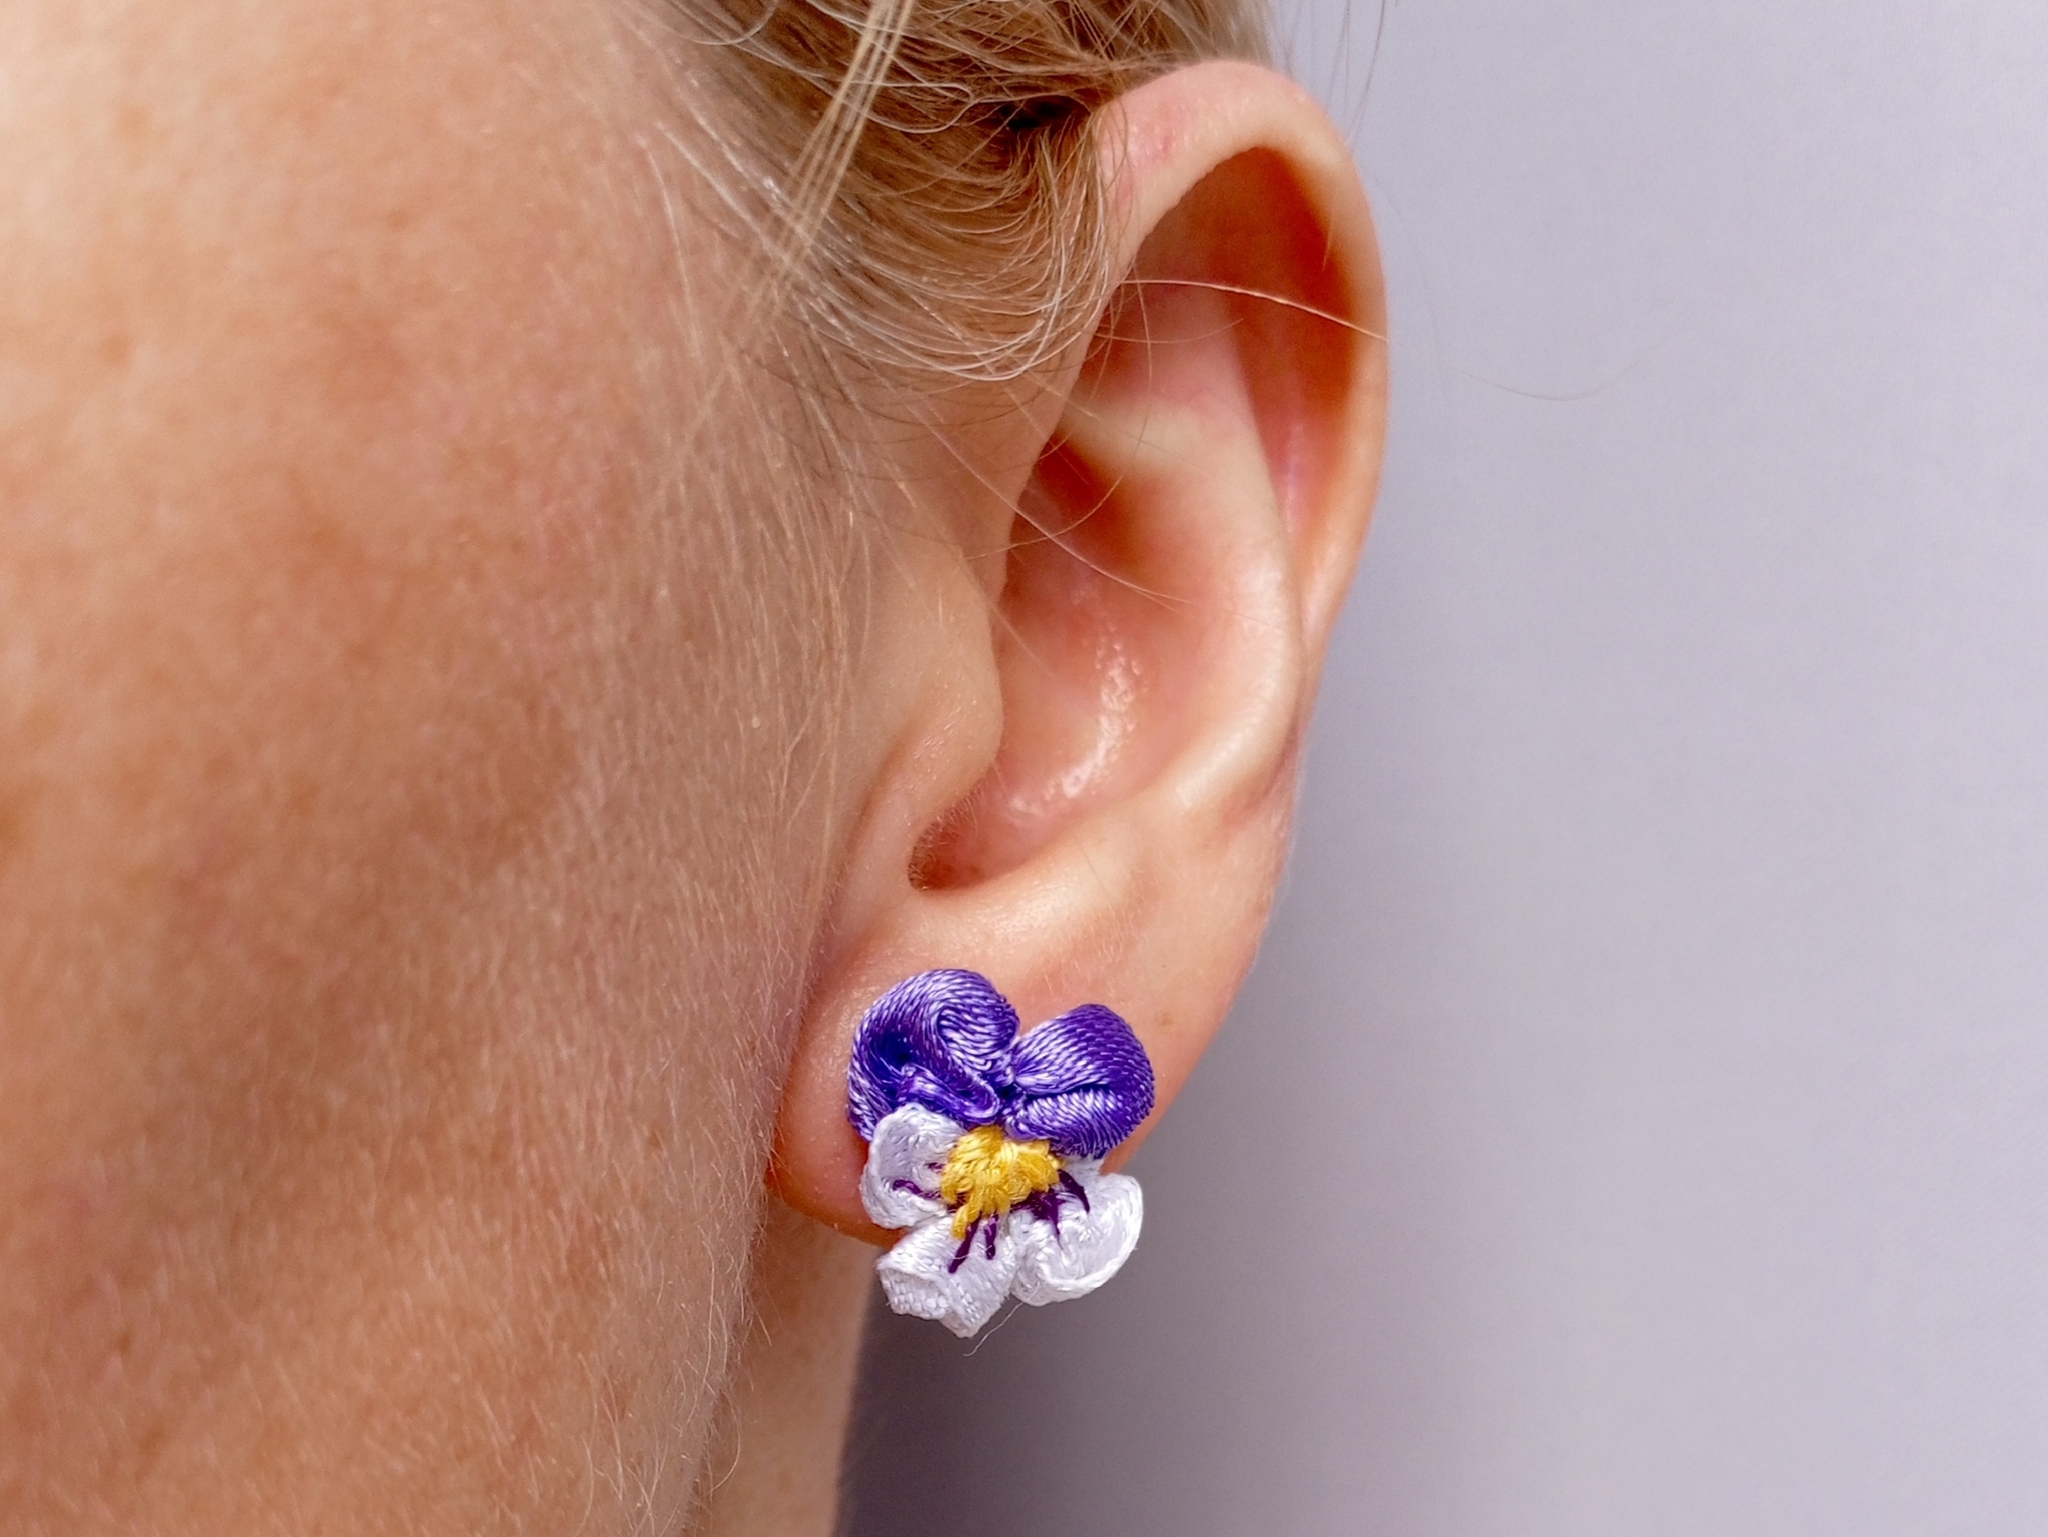 Violet earrings - My, Earrings, Violets, Flowers, Embroidery, Embroidery with ribbons, With your own hands, Decoration, Needlework, Materials for needlework, Needlework with process, Friday tag is mine, Longpost